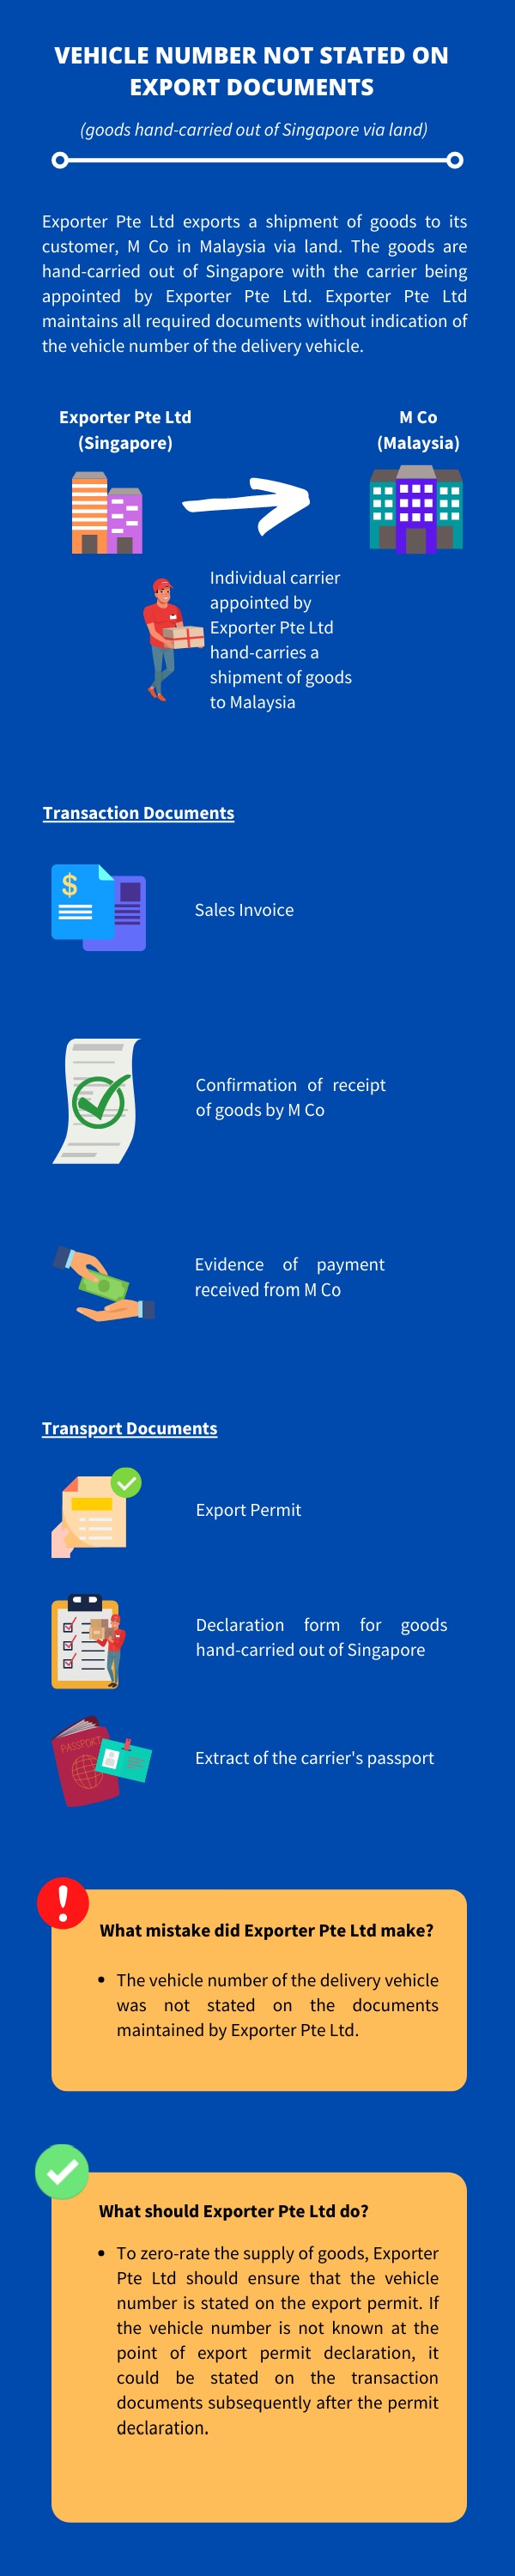 This infographic demonstrates a scenario whereby the vehicle number is not stated on export documents